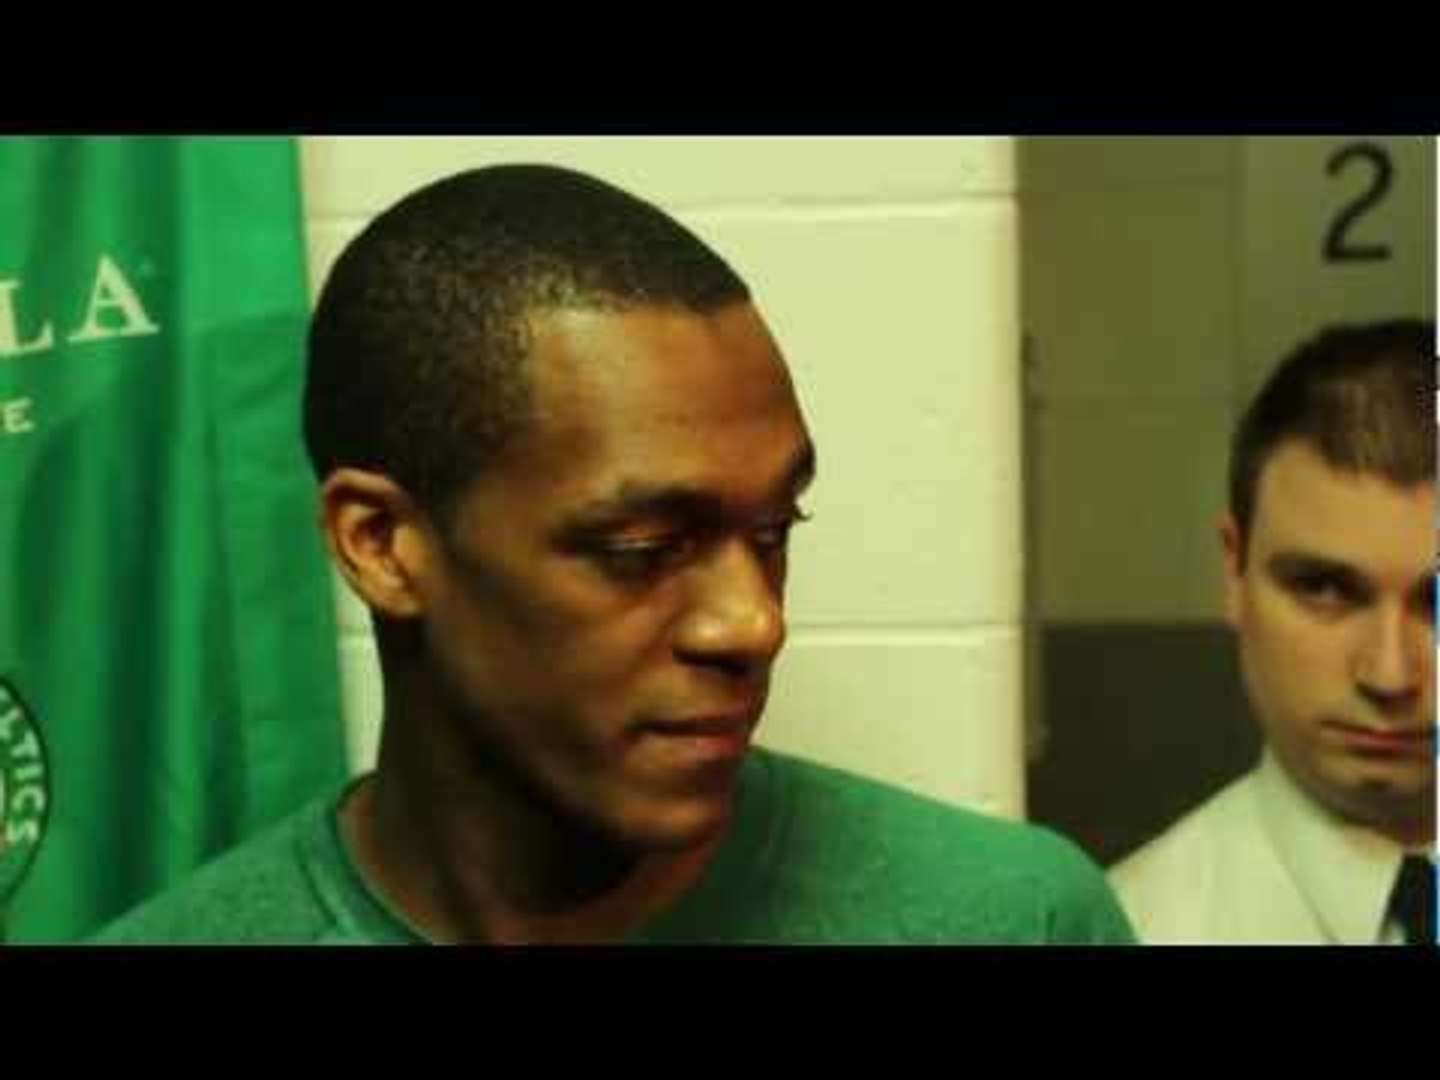 In Today's Edition of “Who Dressed Him?!”: Rajon Rondo, it's time